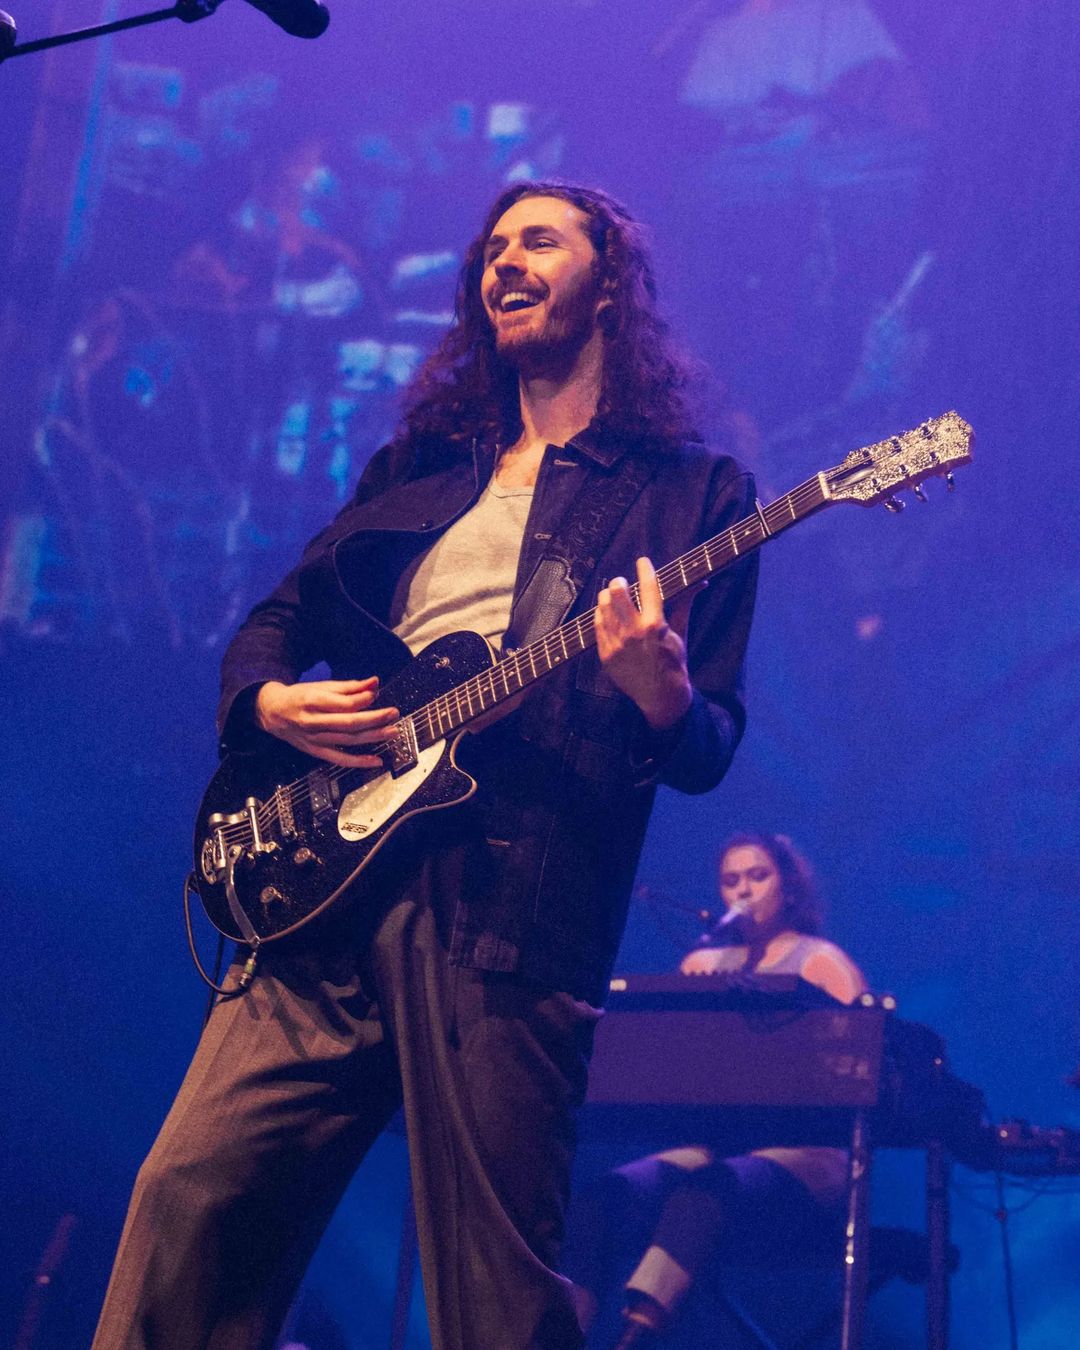 Andrew Hozier-Byrne, known as Hozier